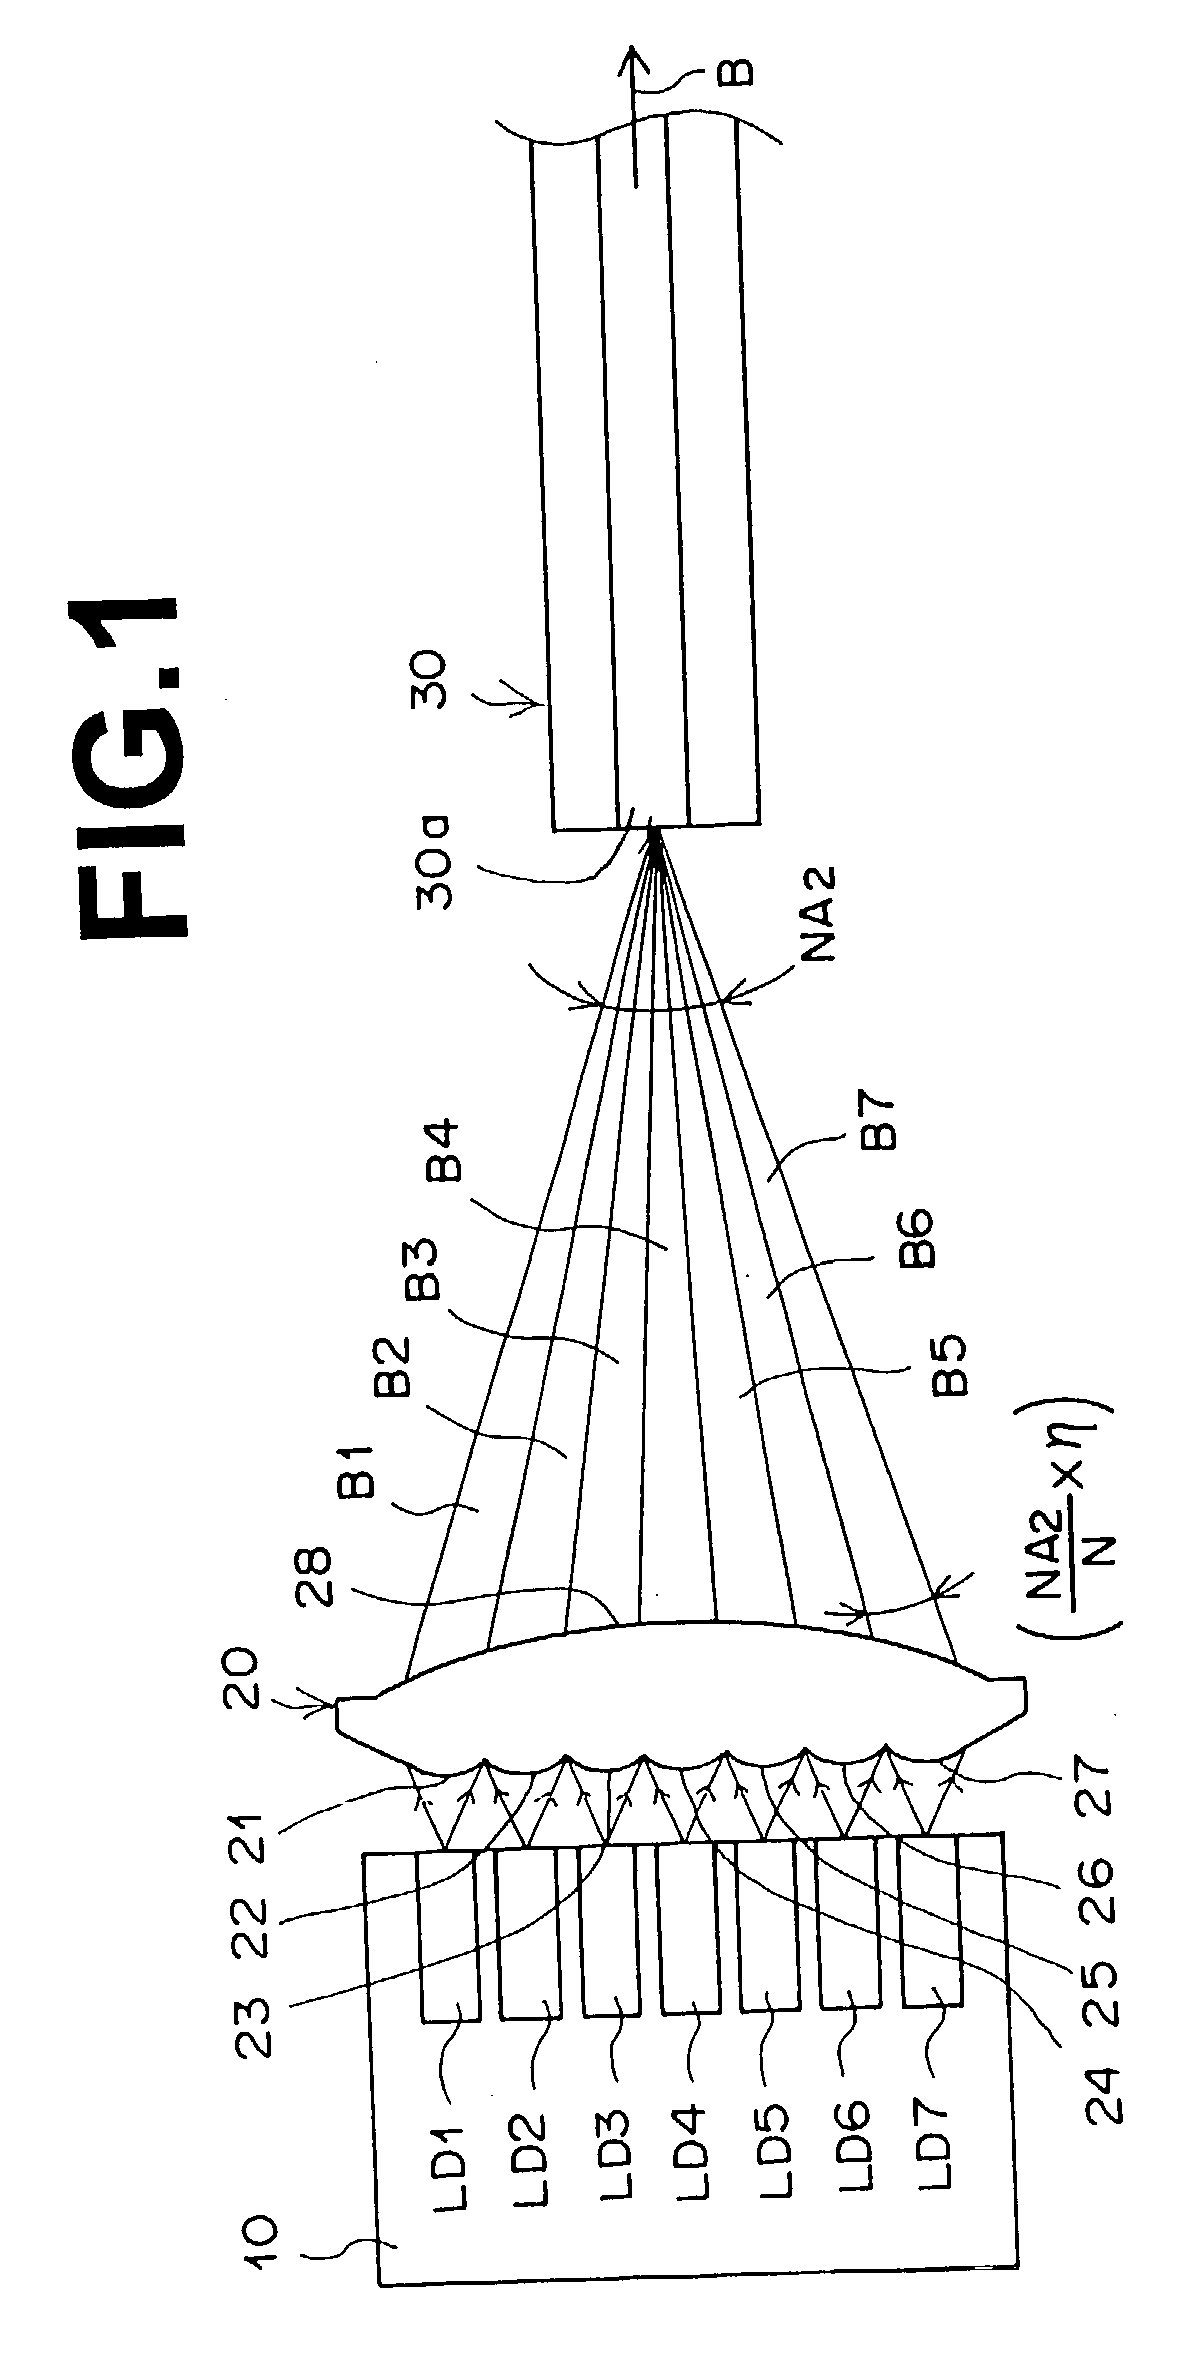 Condensing lens, optically-multiplexed-laser-light source, and exposure system